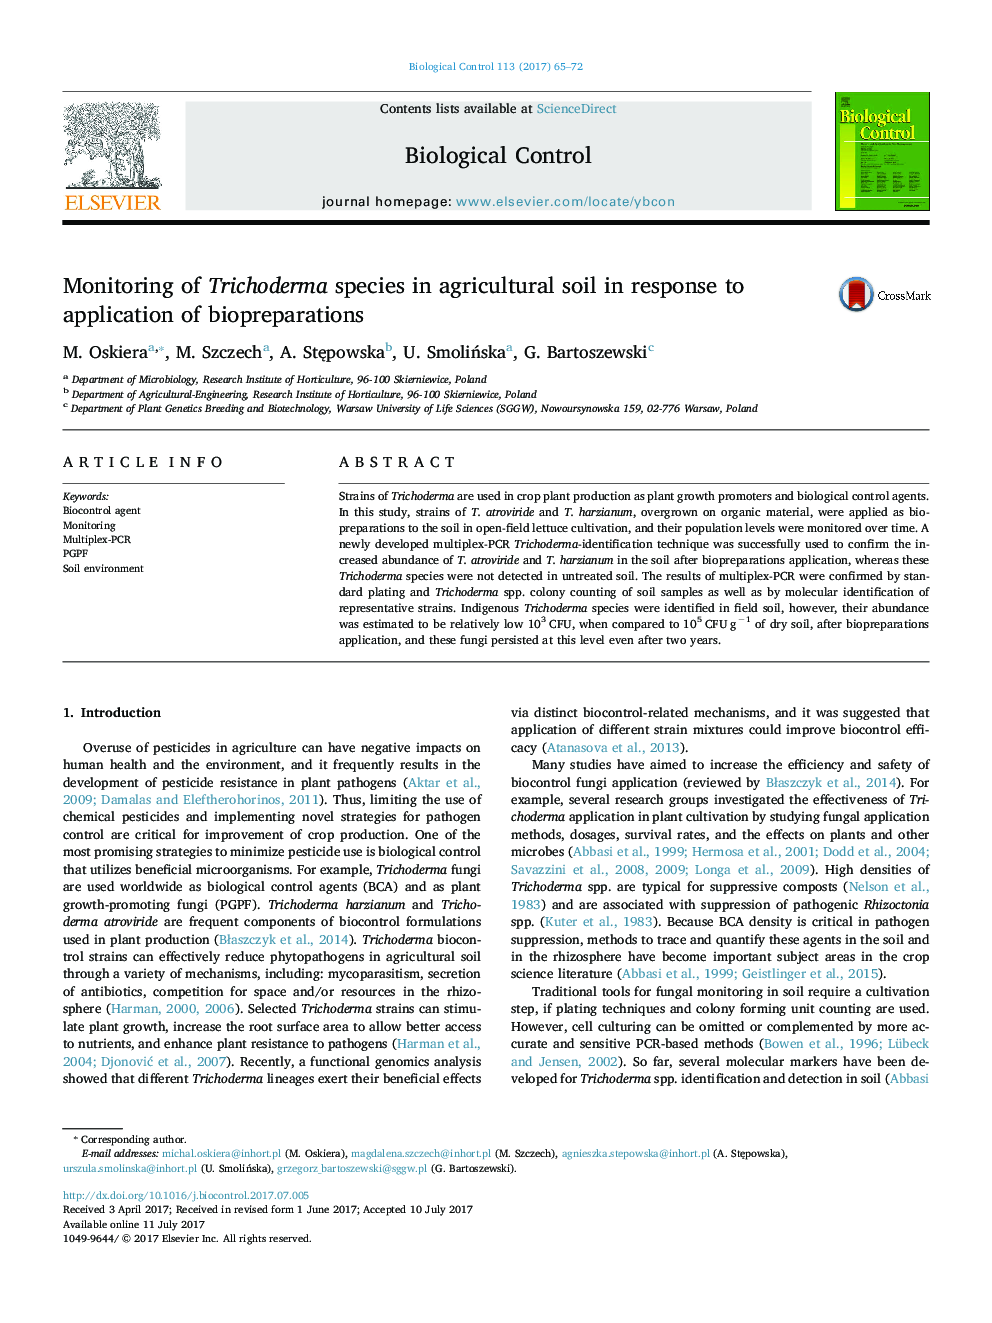 Monitoring of Trichoderma species in agricultural soil in response to application of biopreparations